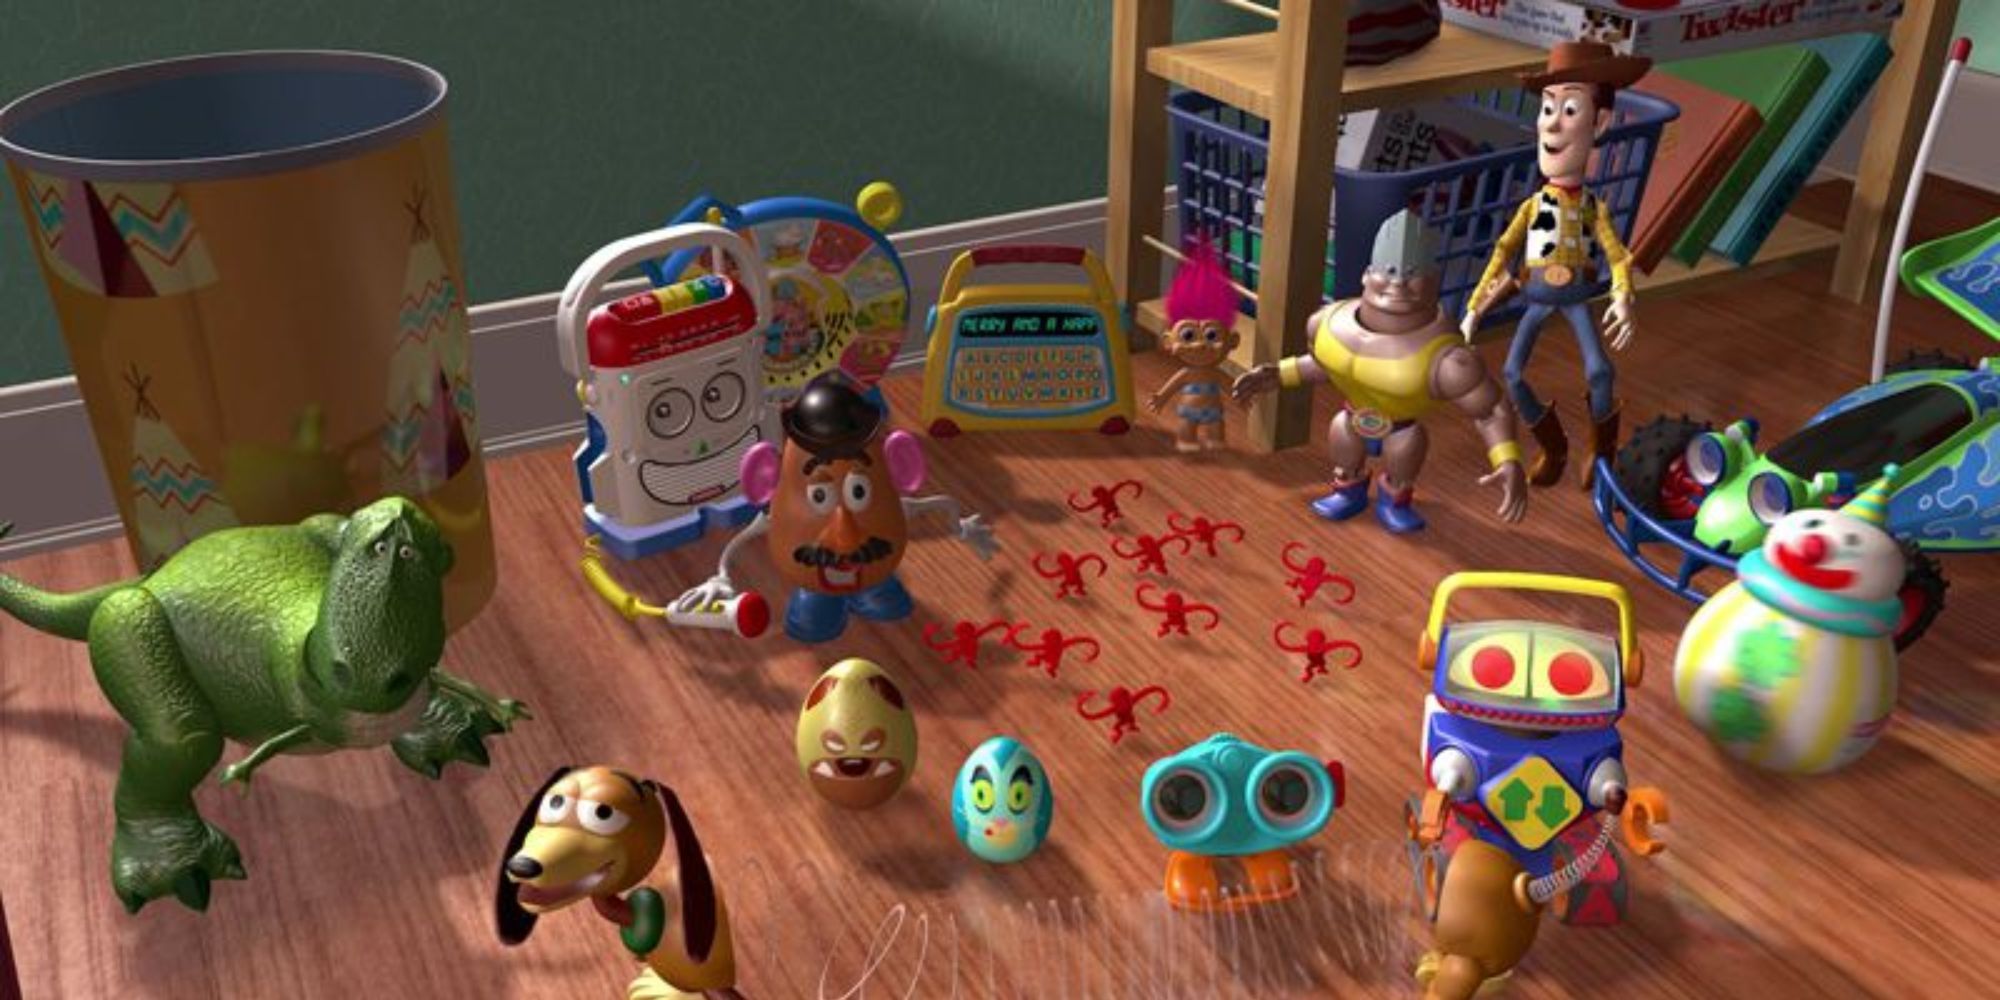 An ariel view of the toys in Andy's bedroom in Toy Story